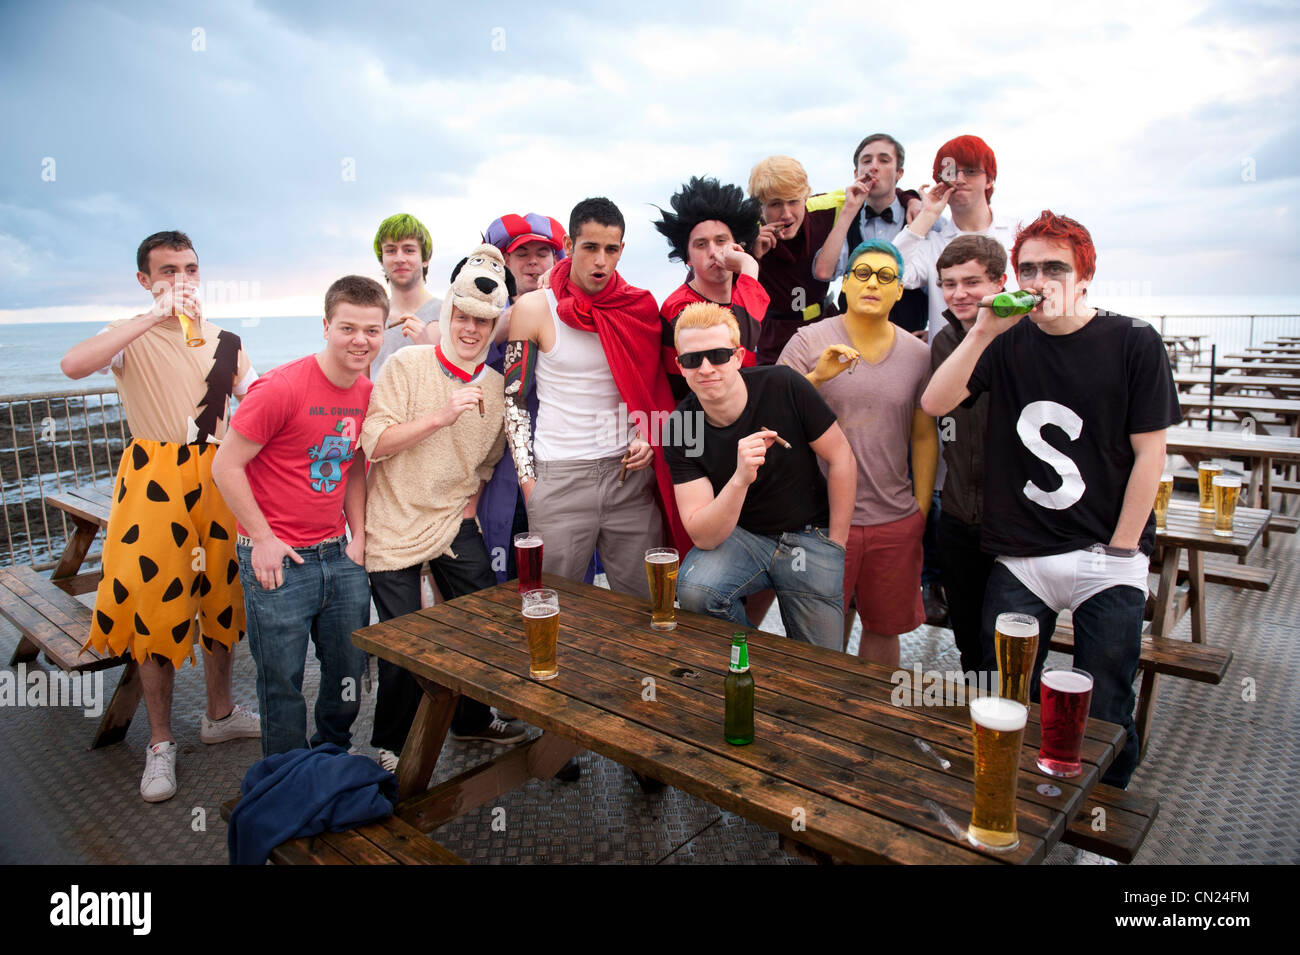 a goup of young men on a pub crawl celebrating a birthday party, Aberystwyth Wales UK Stock Photo